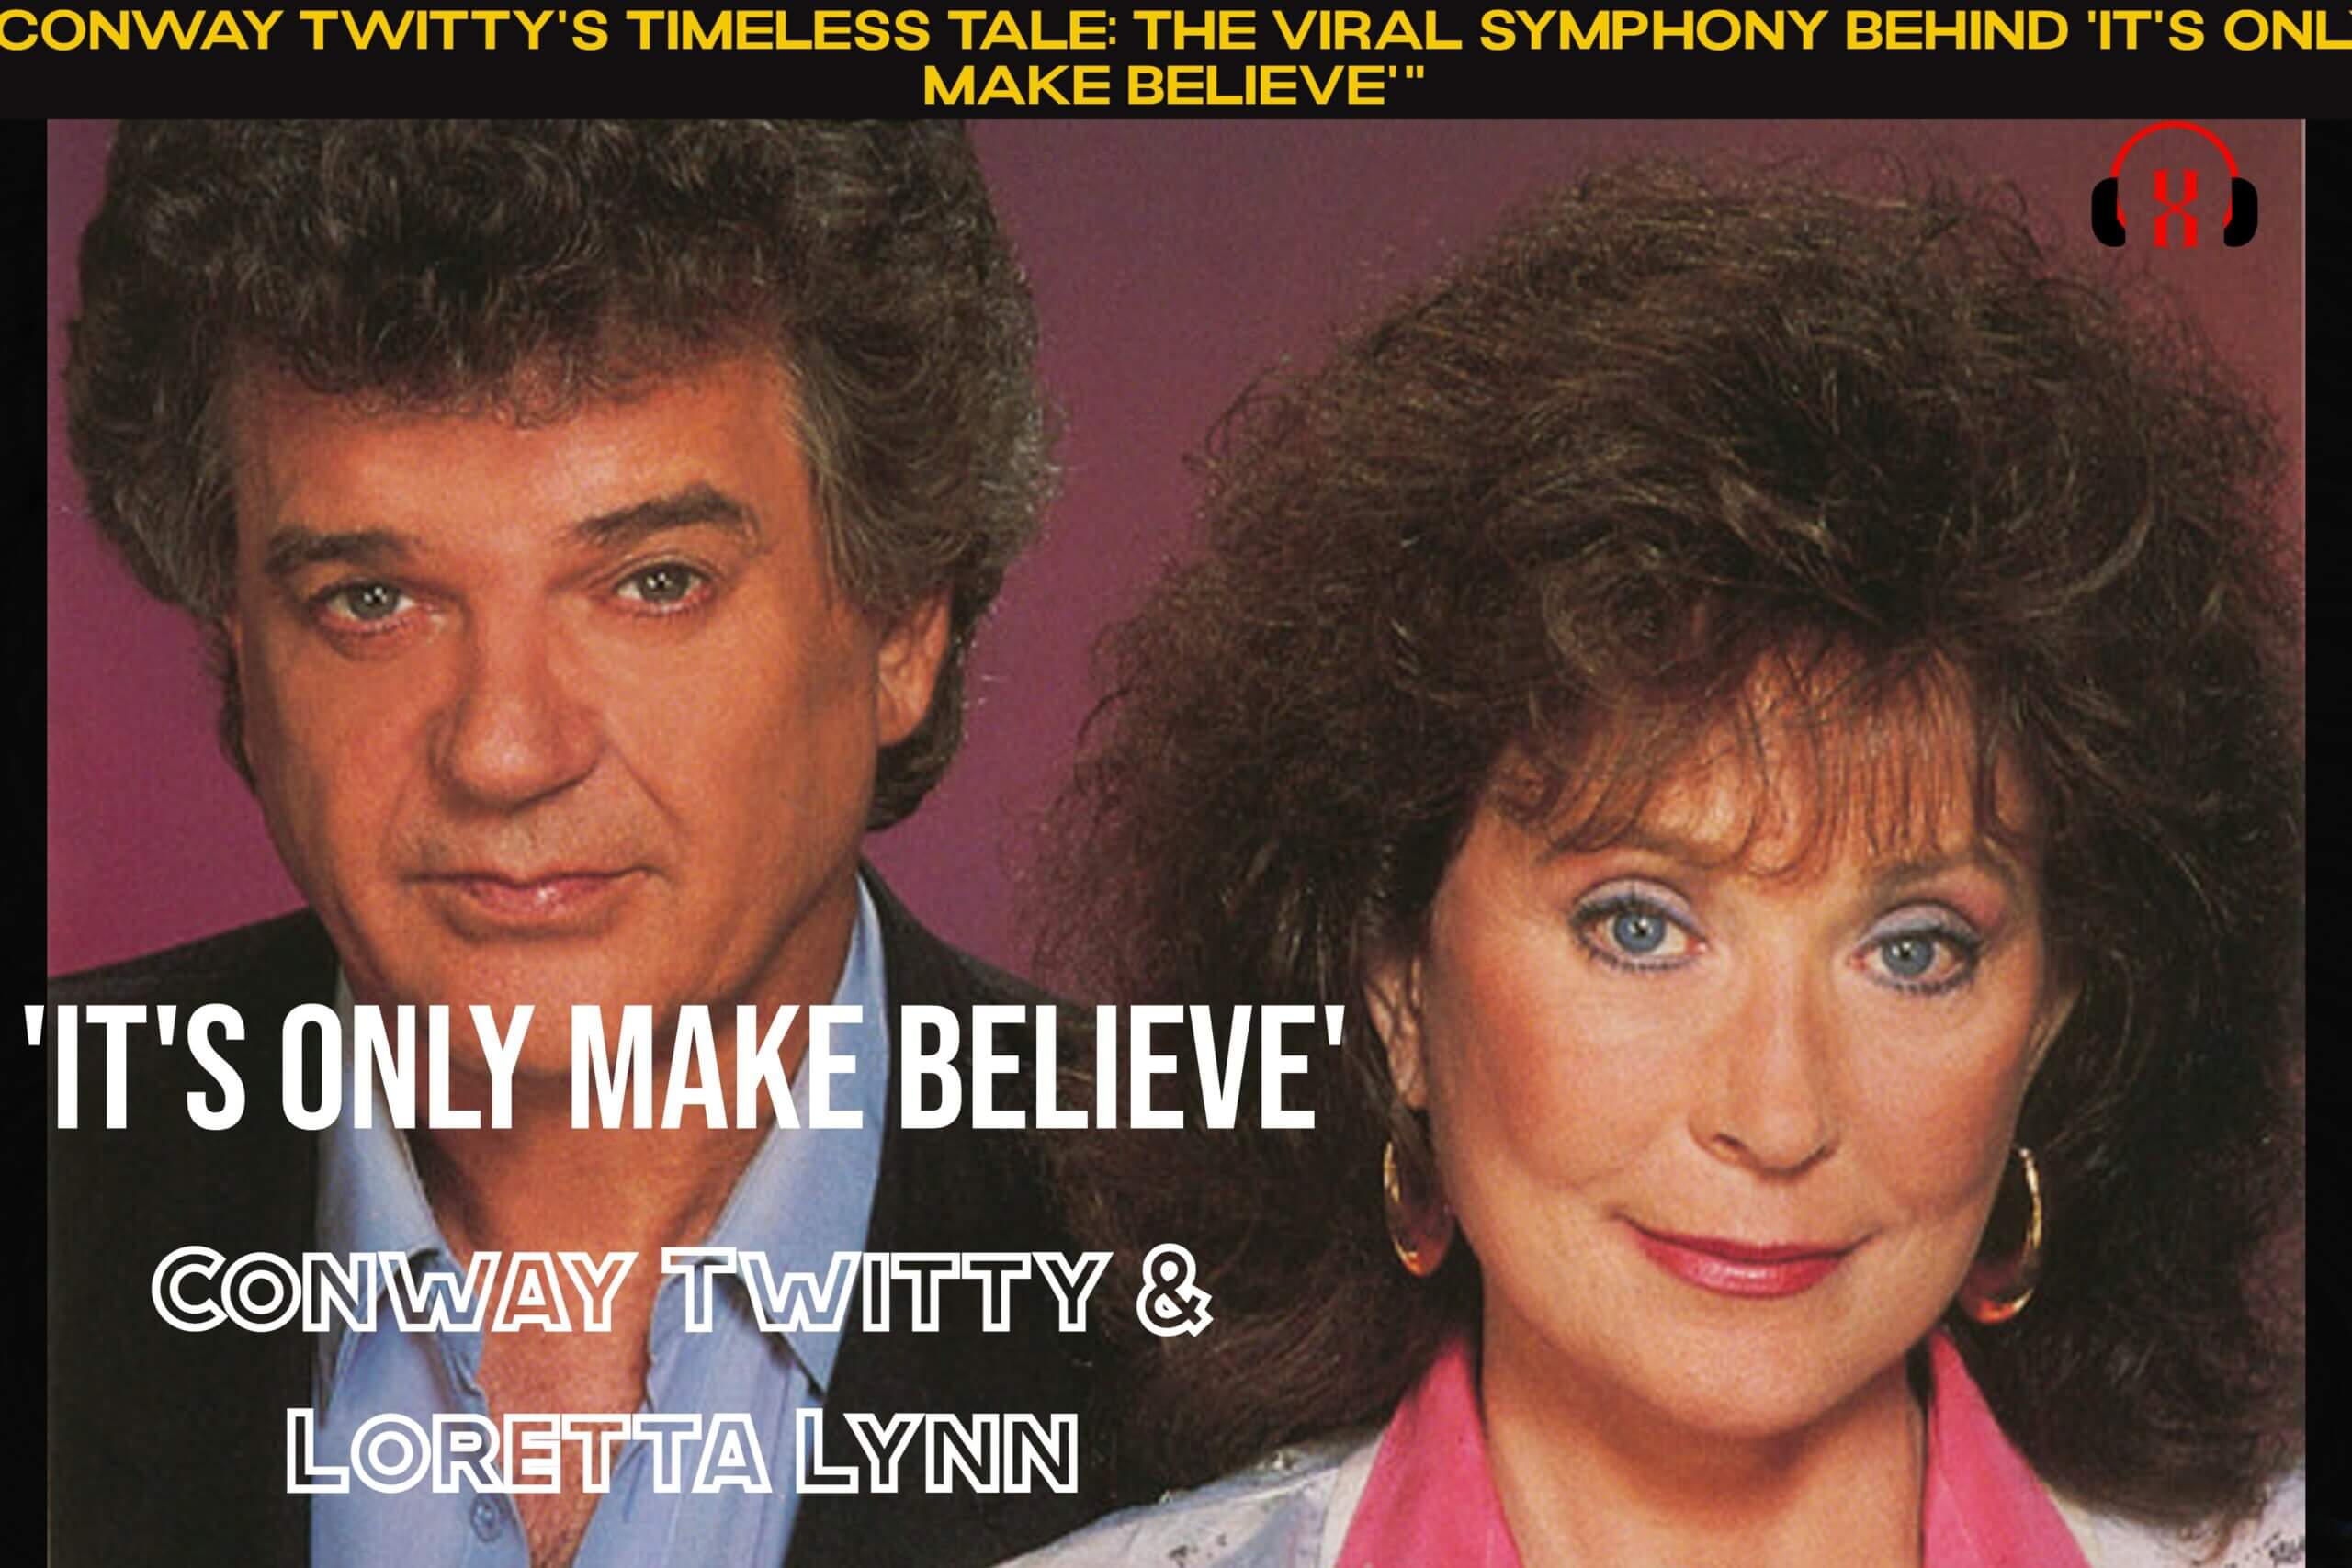 "Conway Twitty's Timeless Tale: The Viral Symphony Behind 'It's Only Make Believe'"